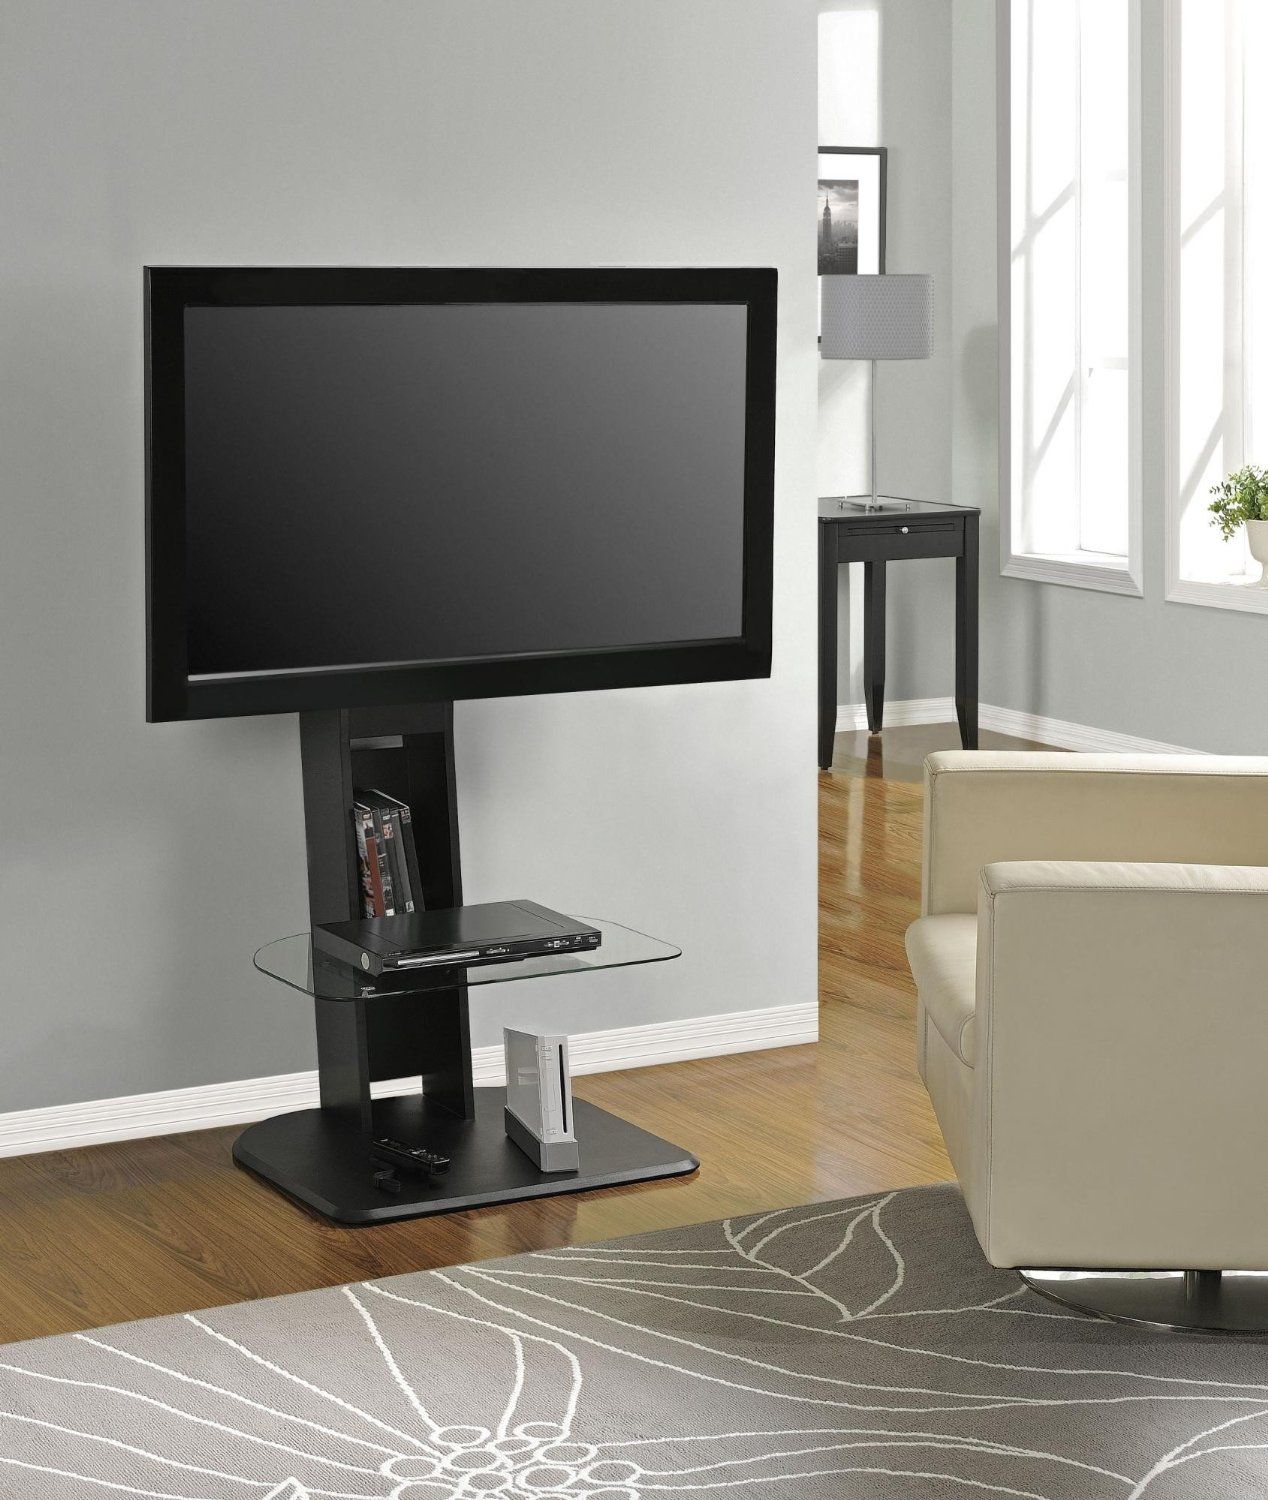 Cool Flat Screen Tv Stands With Mount – Homesfeed Pertaining To Small Black Tv Cabinets (View 11 of 15)